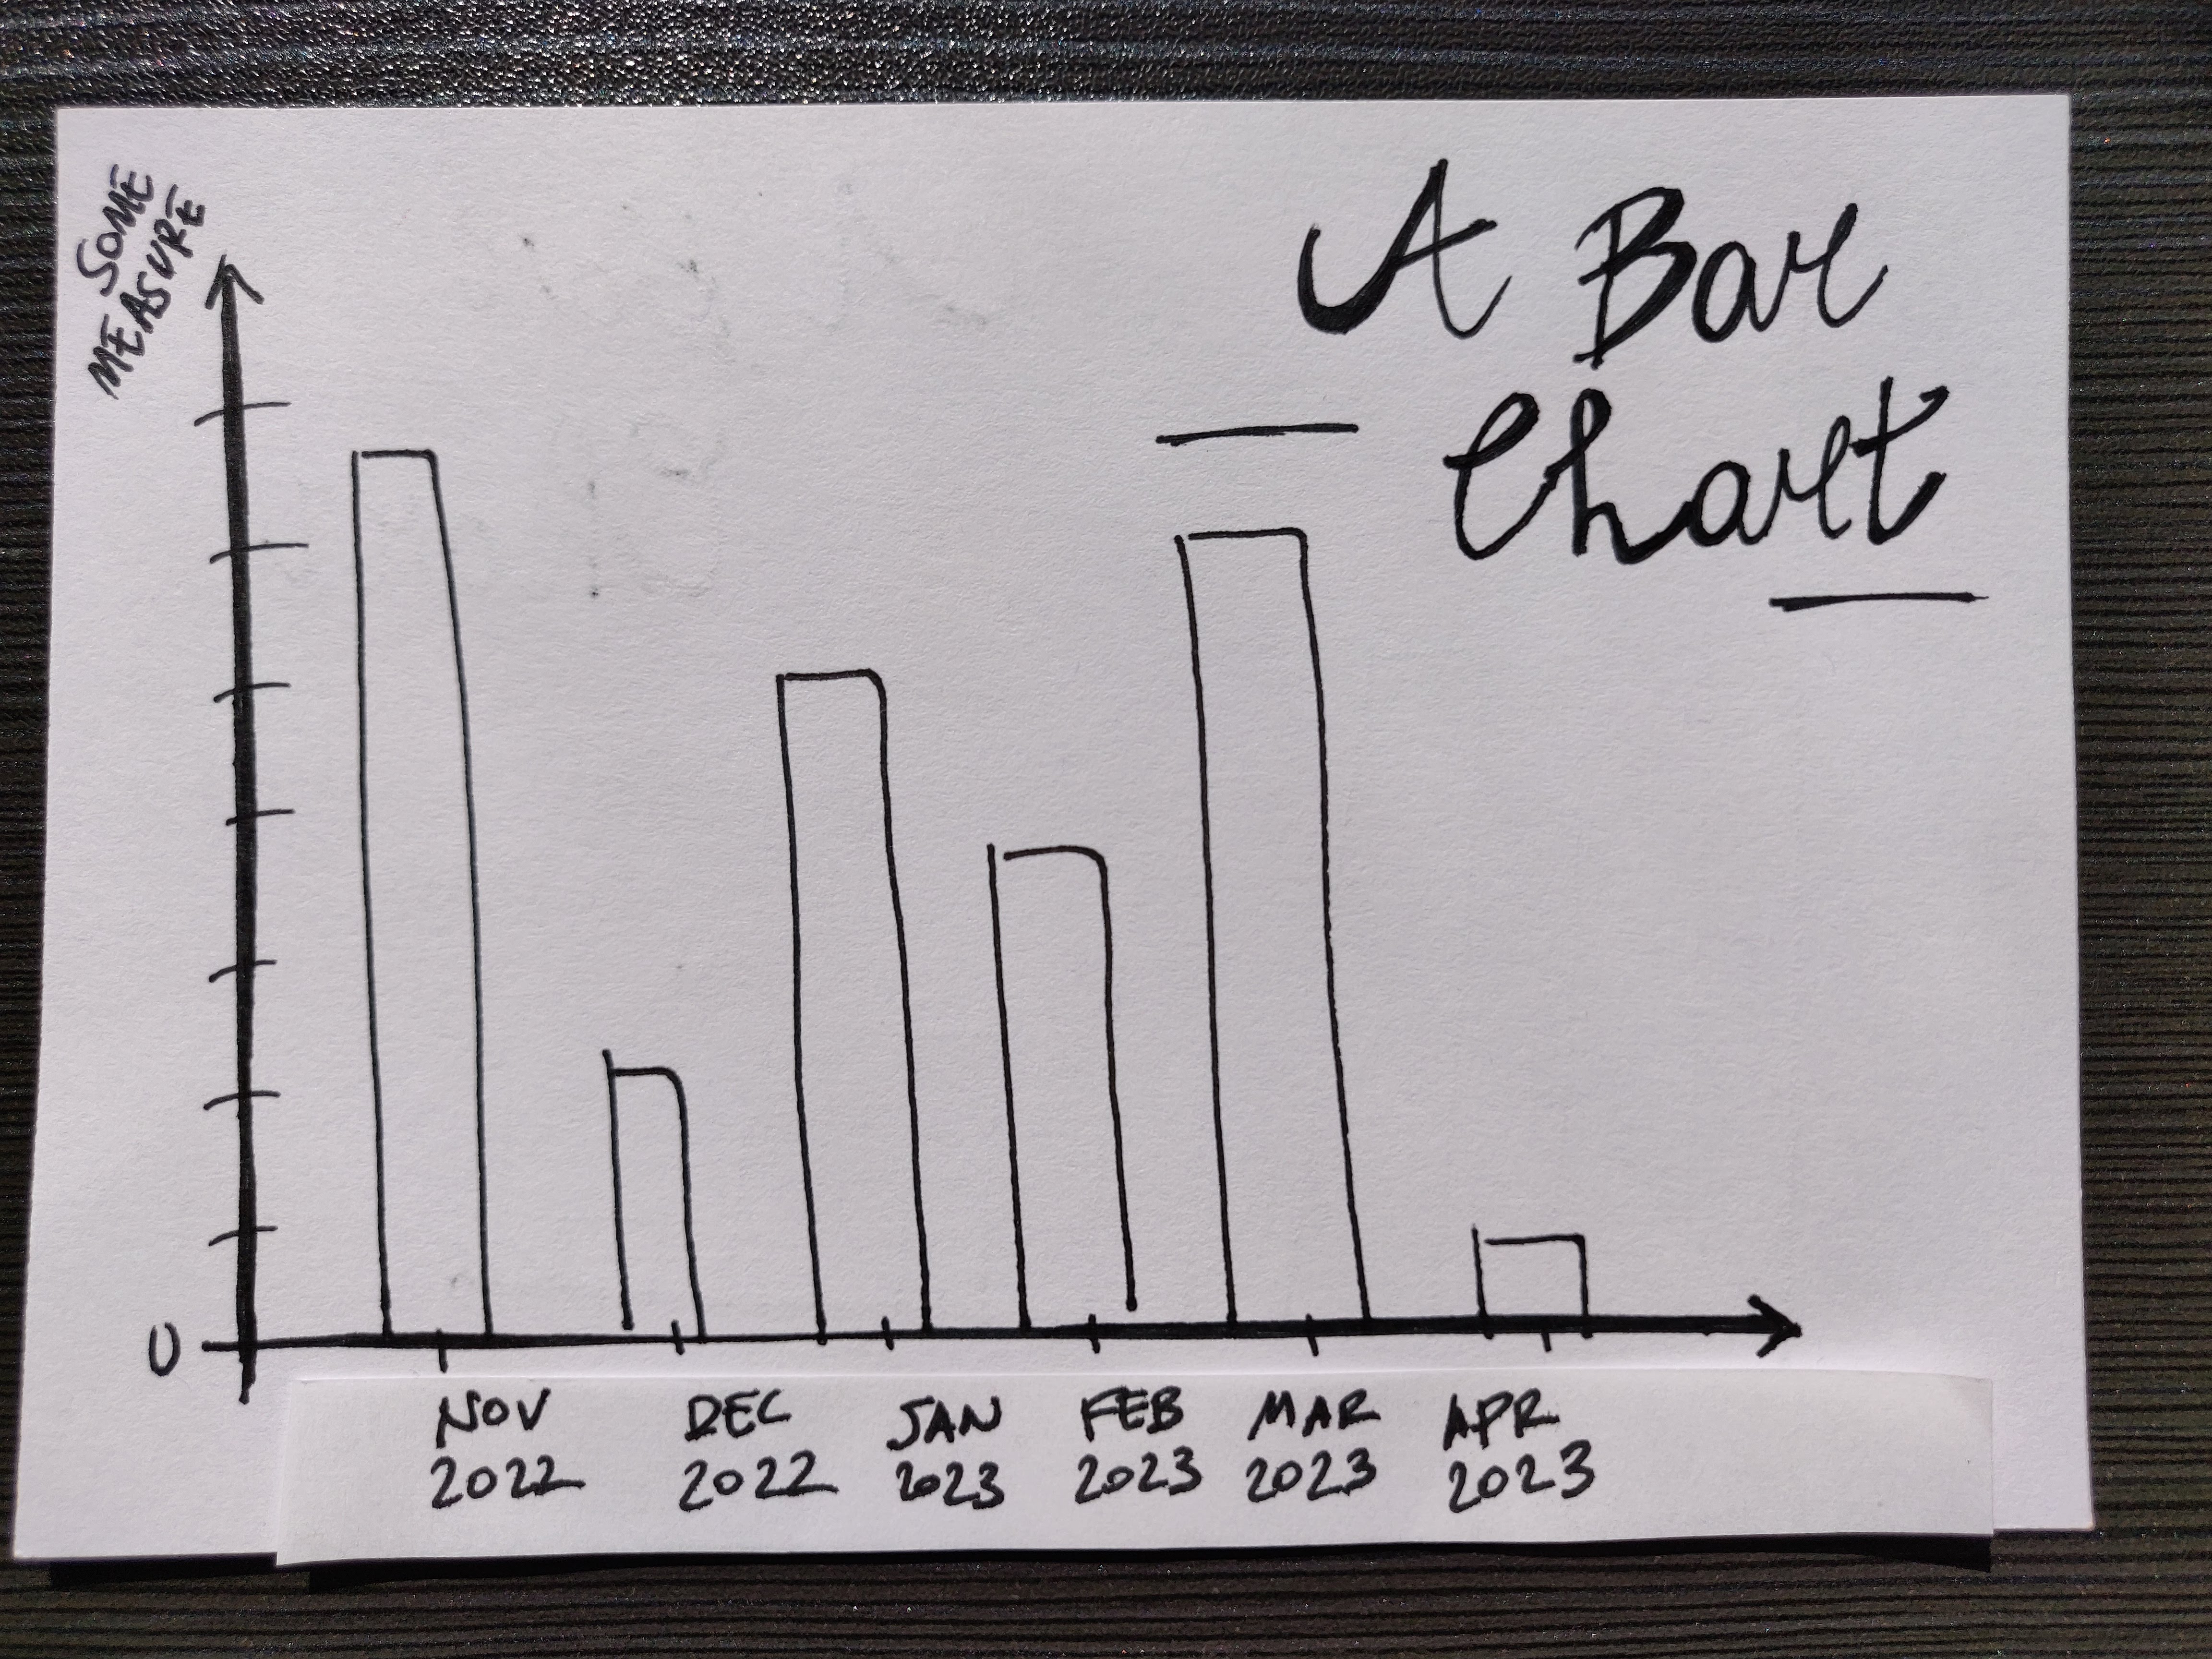 A plain bar chart, hand-drawn, with months on the x-axis and no colour.